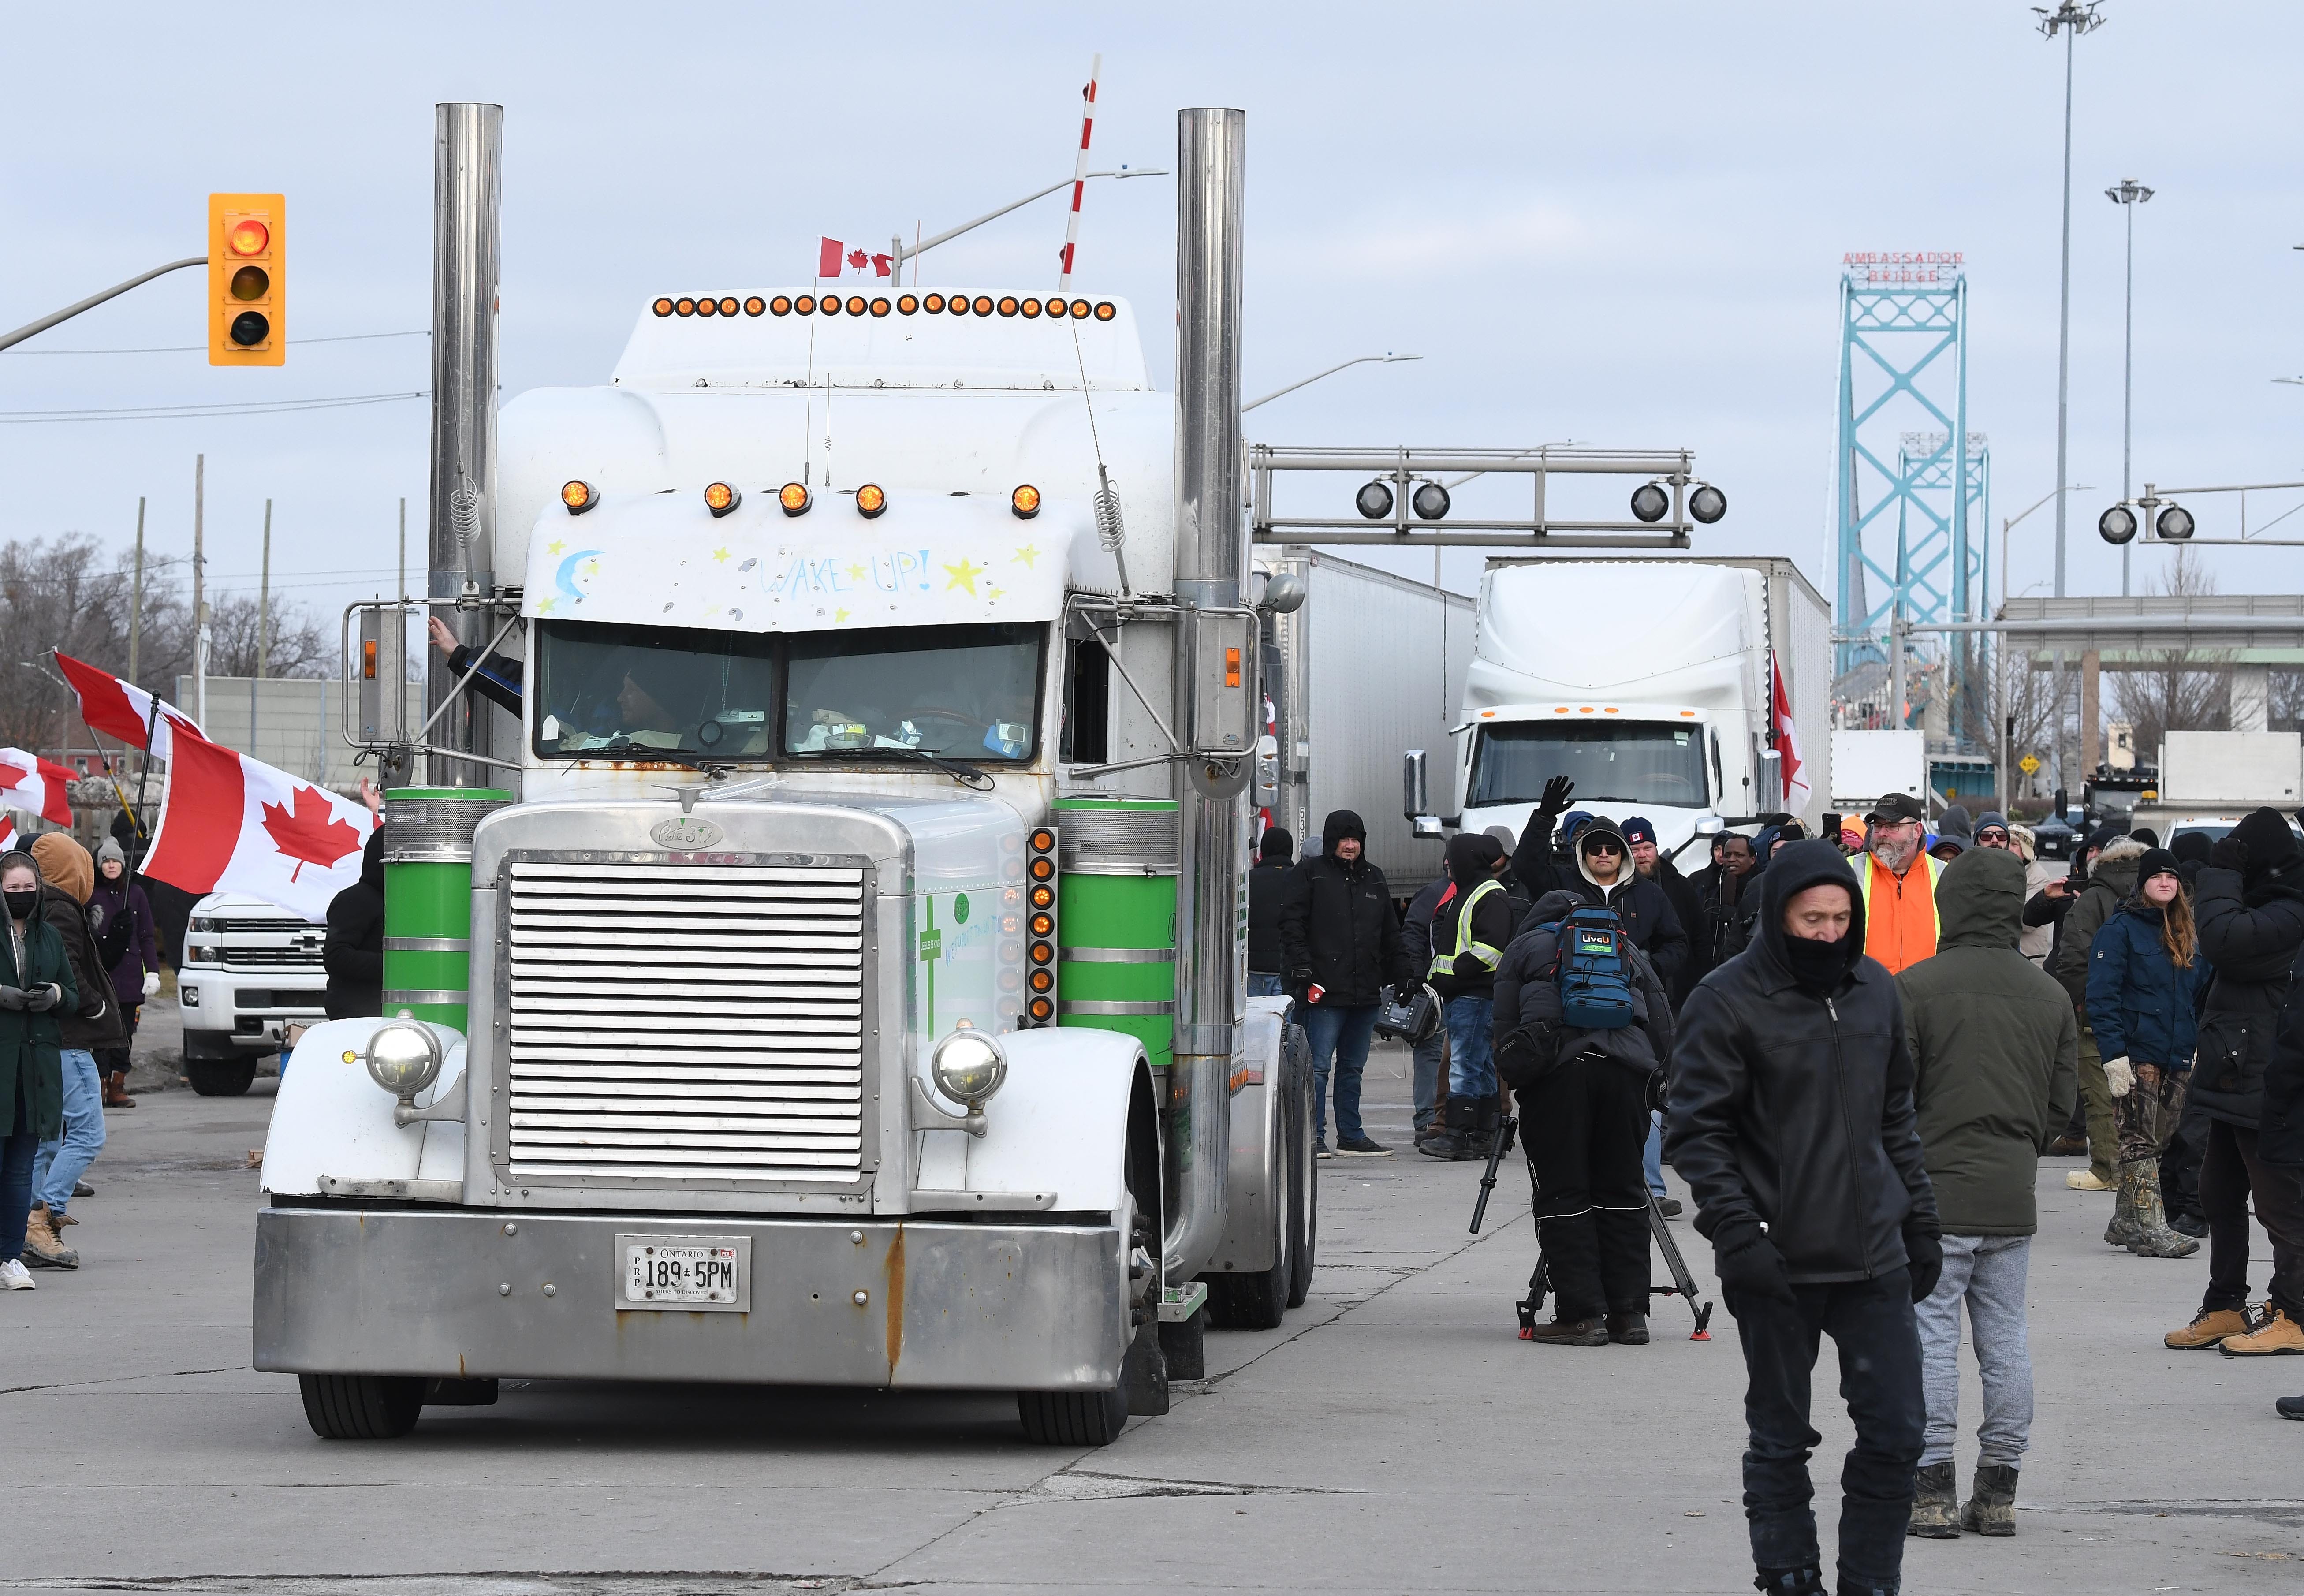 Semi trucks are moved down the road by police, opening the road to the Ambassador bridge in Windsor, Ontario, on Saturday, February 12, 2022.